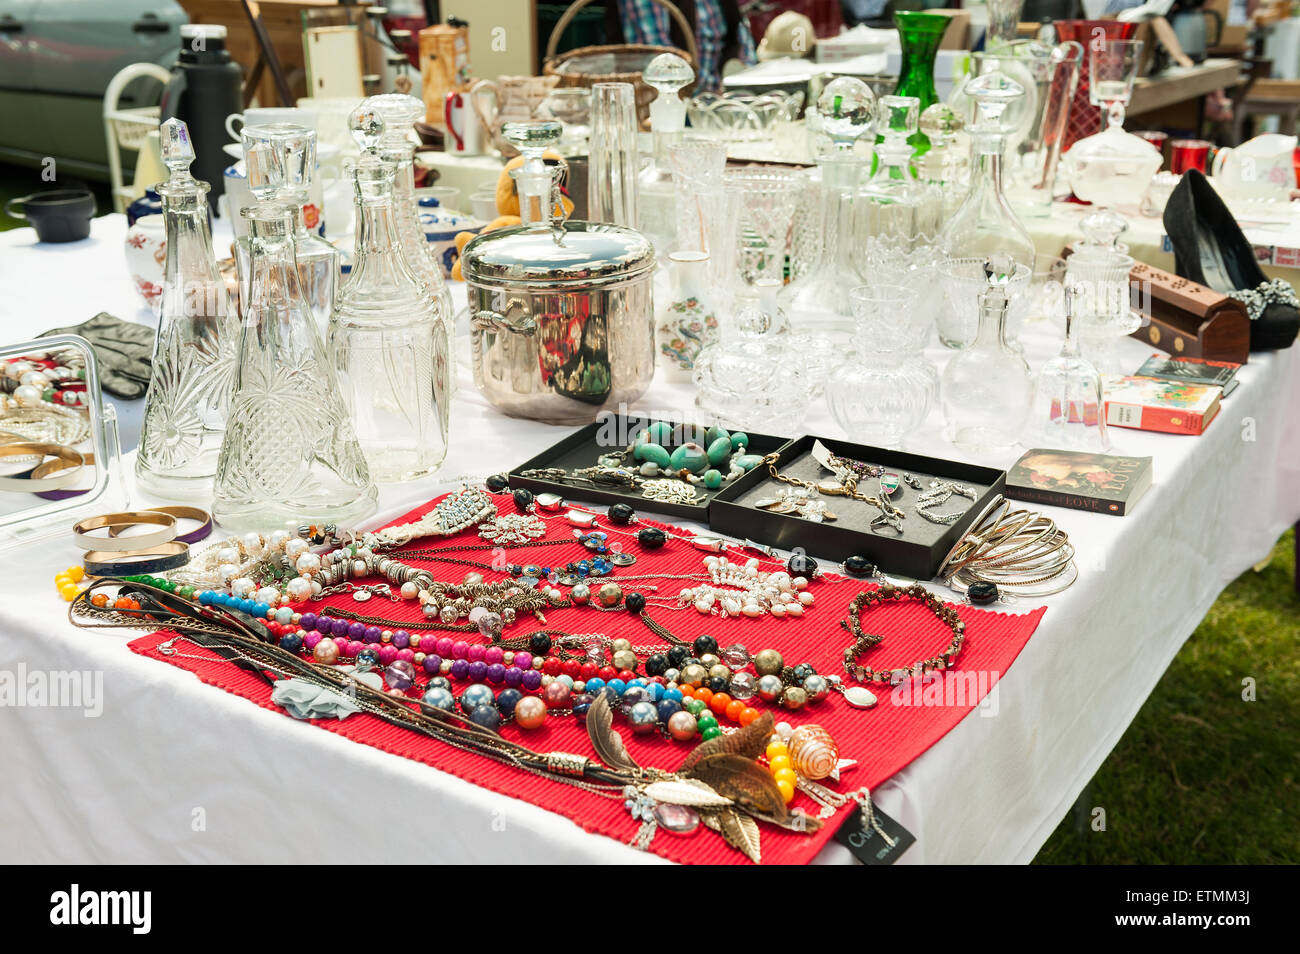 Typical display of household items for sale laid out on table at car boot fair nick knacks glasses jewelery glass wooden plane Stock Photo